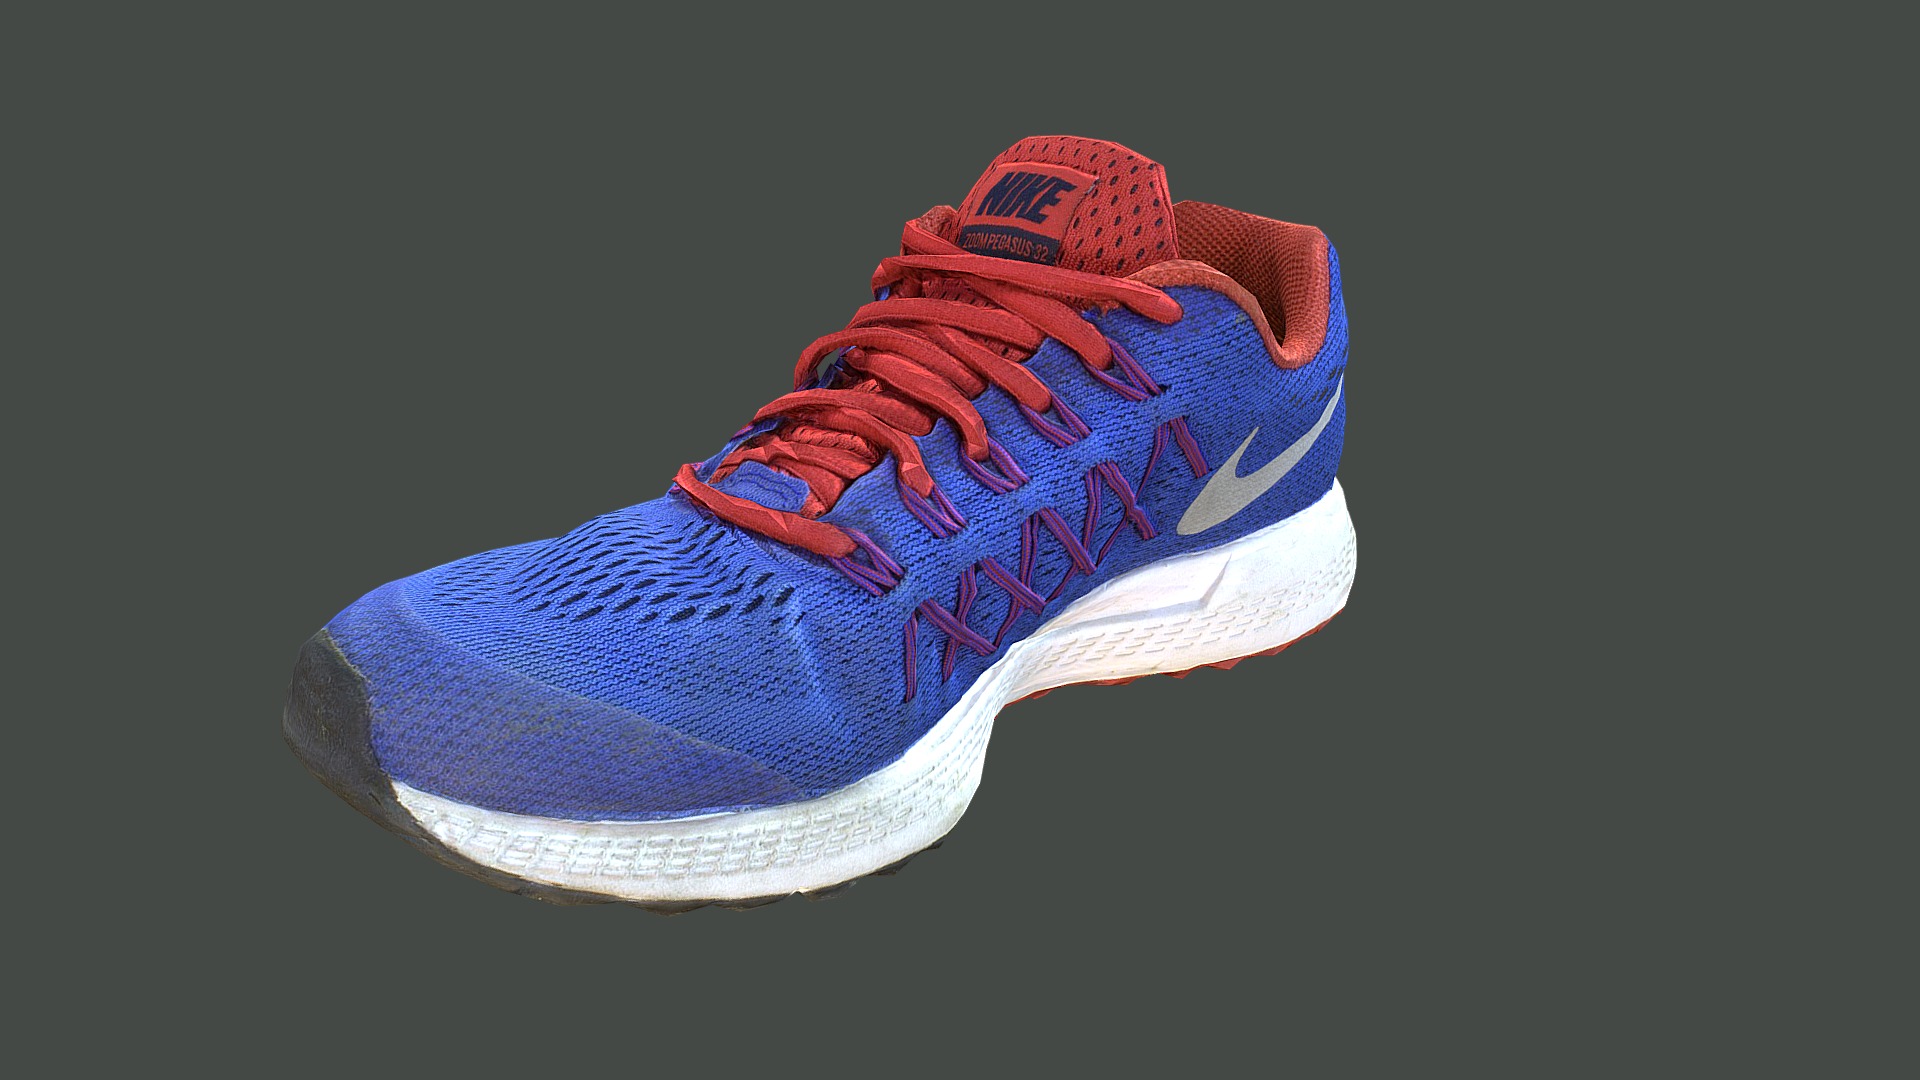 3D model Sneaker low poly 3D model - This is a 3D model of the Sneaker low poly 3D model. The 3D model is about a blue and red shoe.